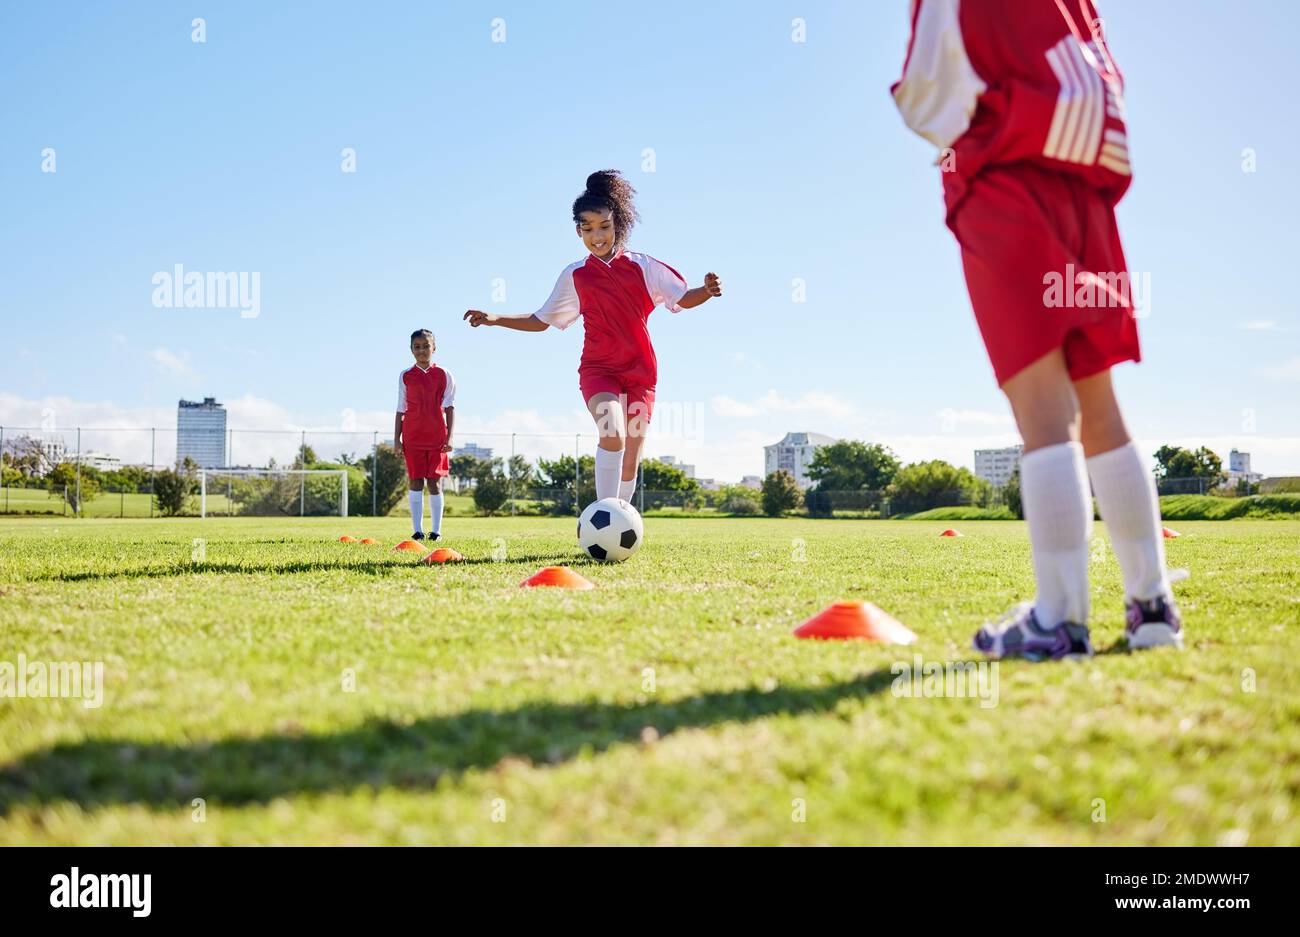 Soccer, training or running and a girl team playing with a ball together on a field for practice. Fitness, football and grass with sports kids Stock Photo